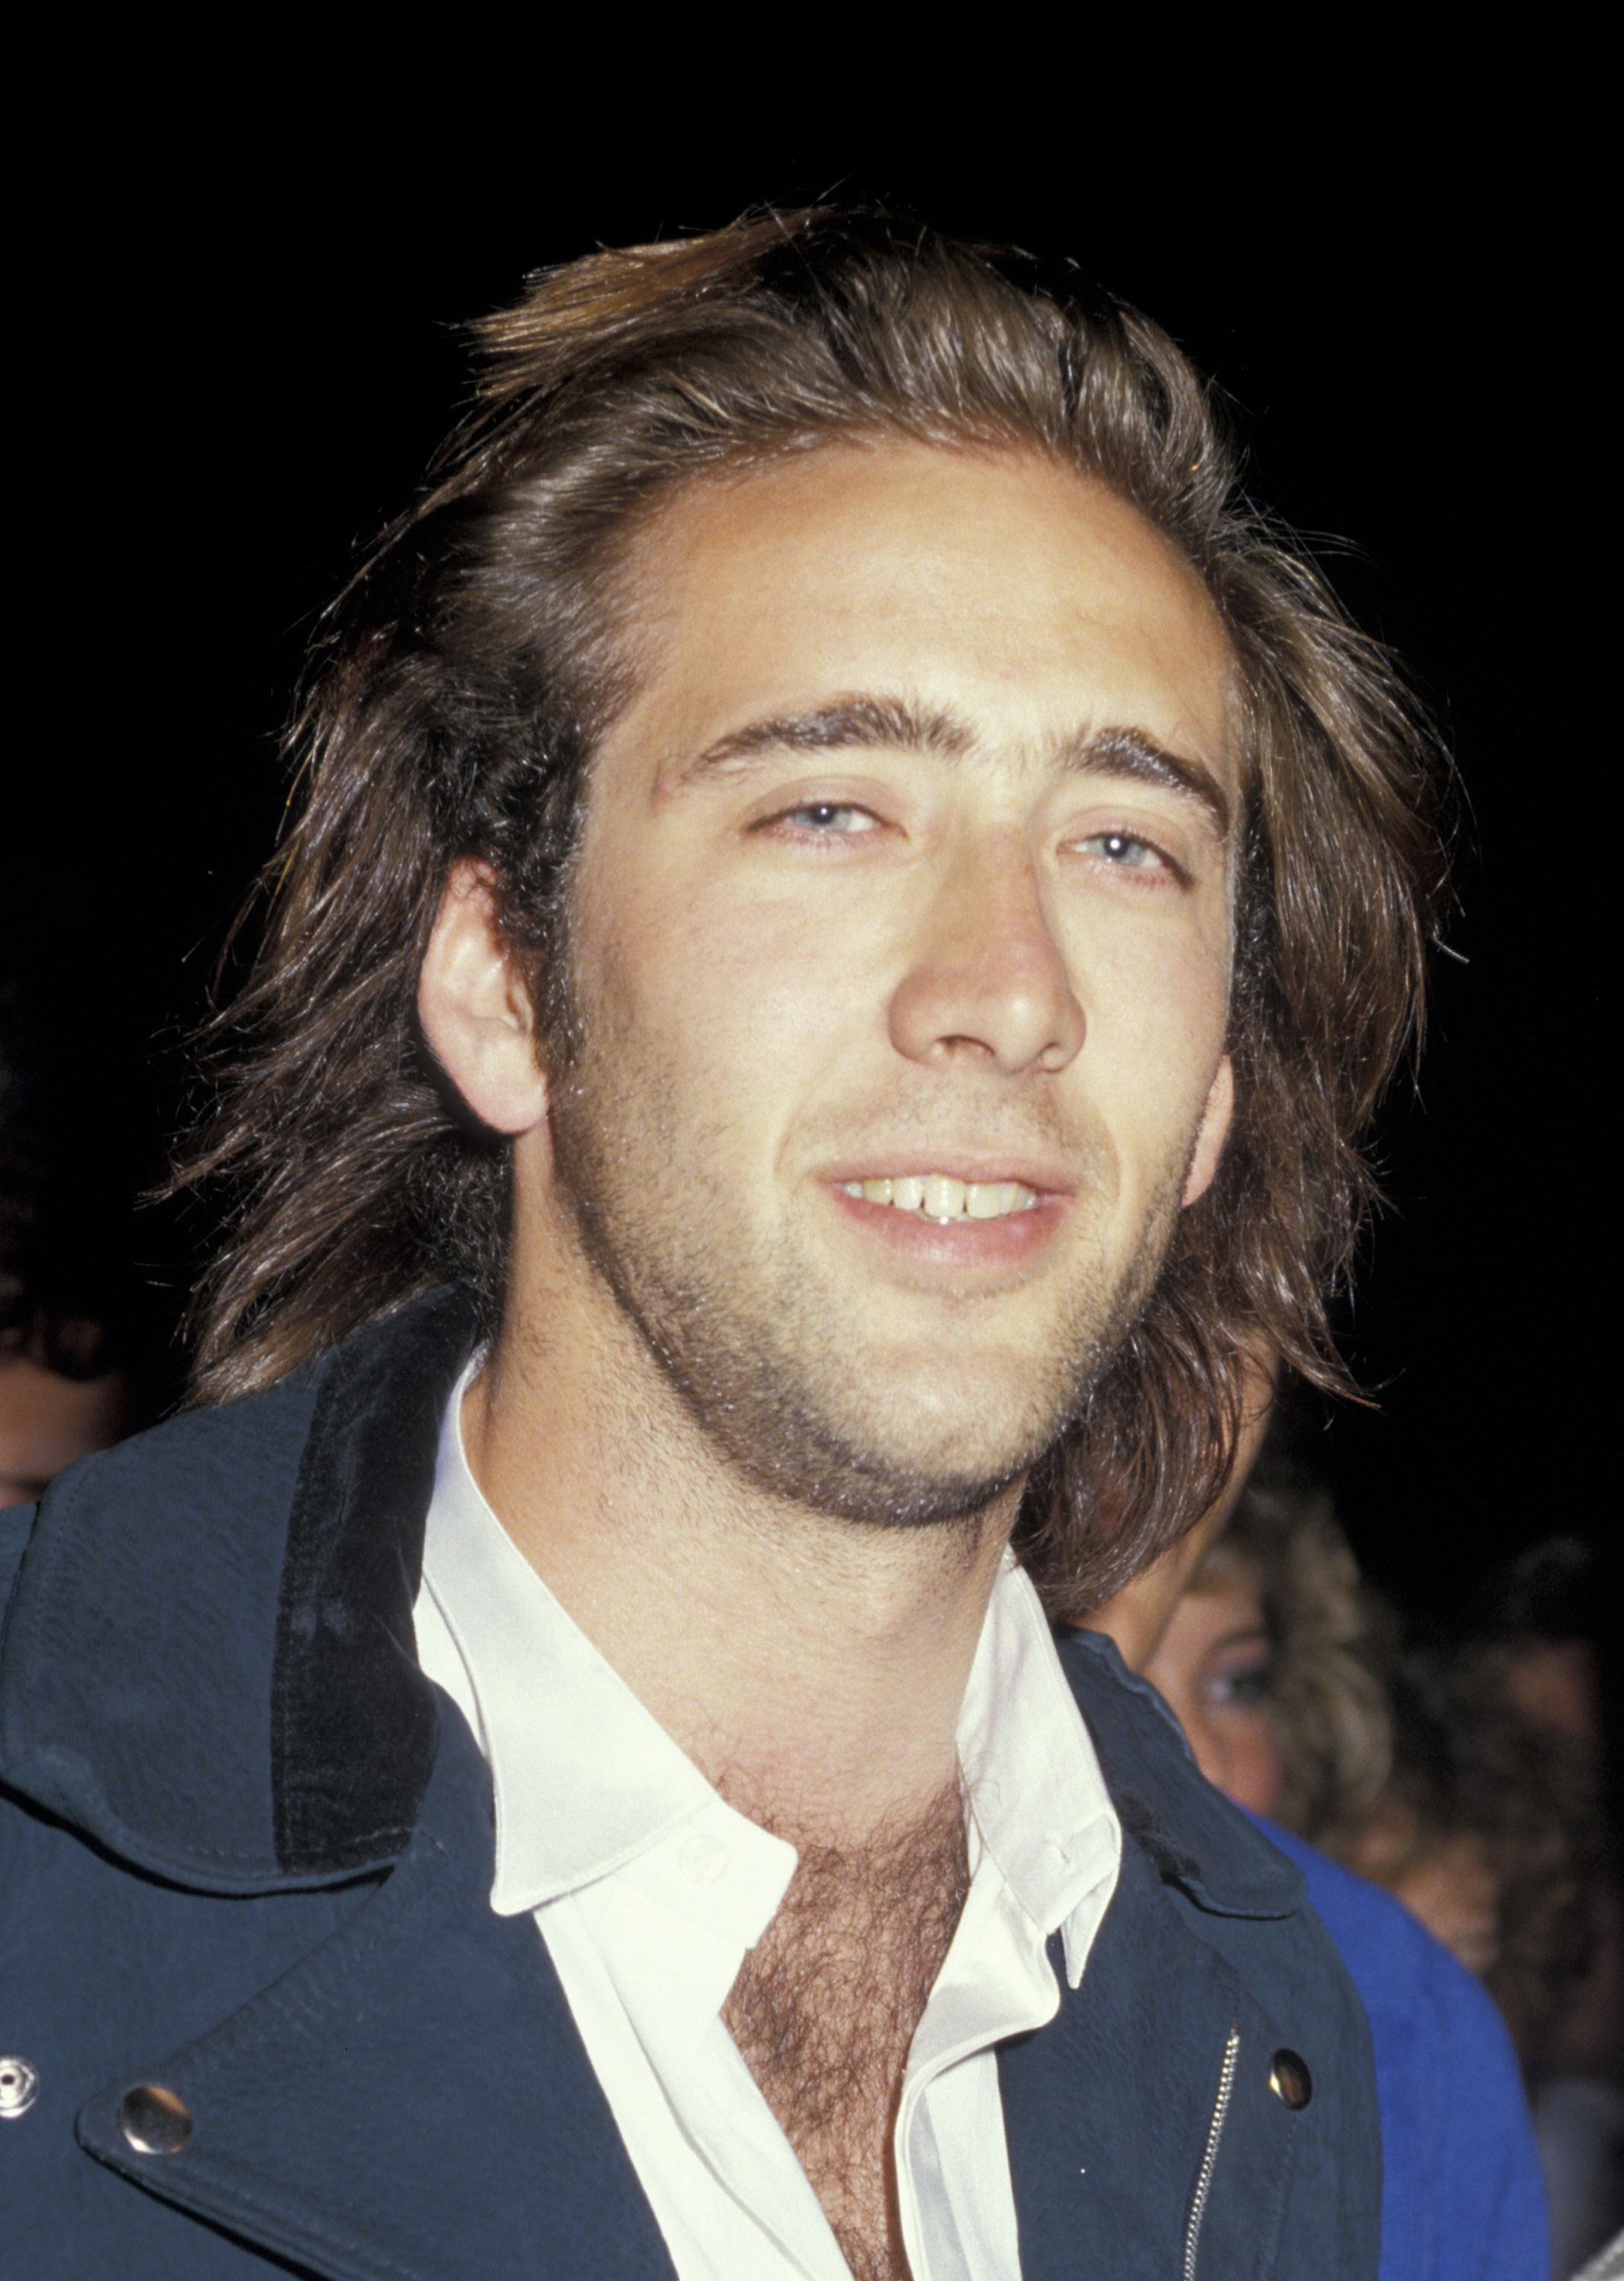 Nicolas Cage at the premiere of "Dragnet" on June 23, 1987. | Source: Getty Images